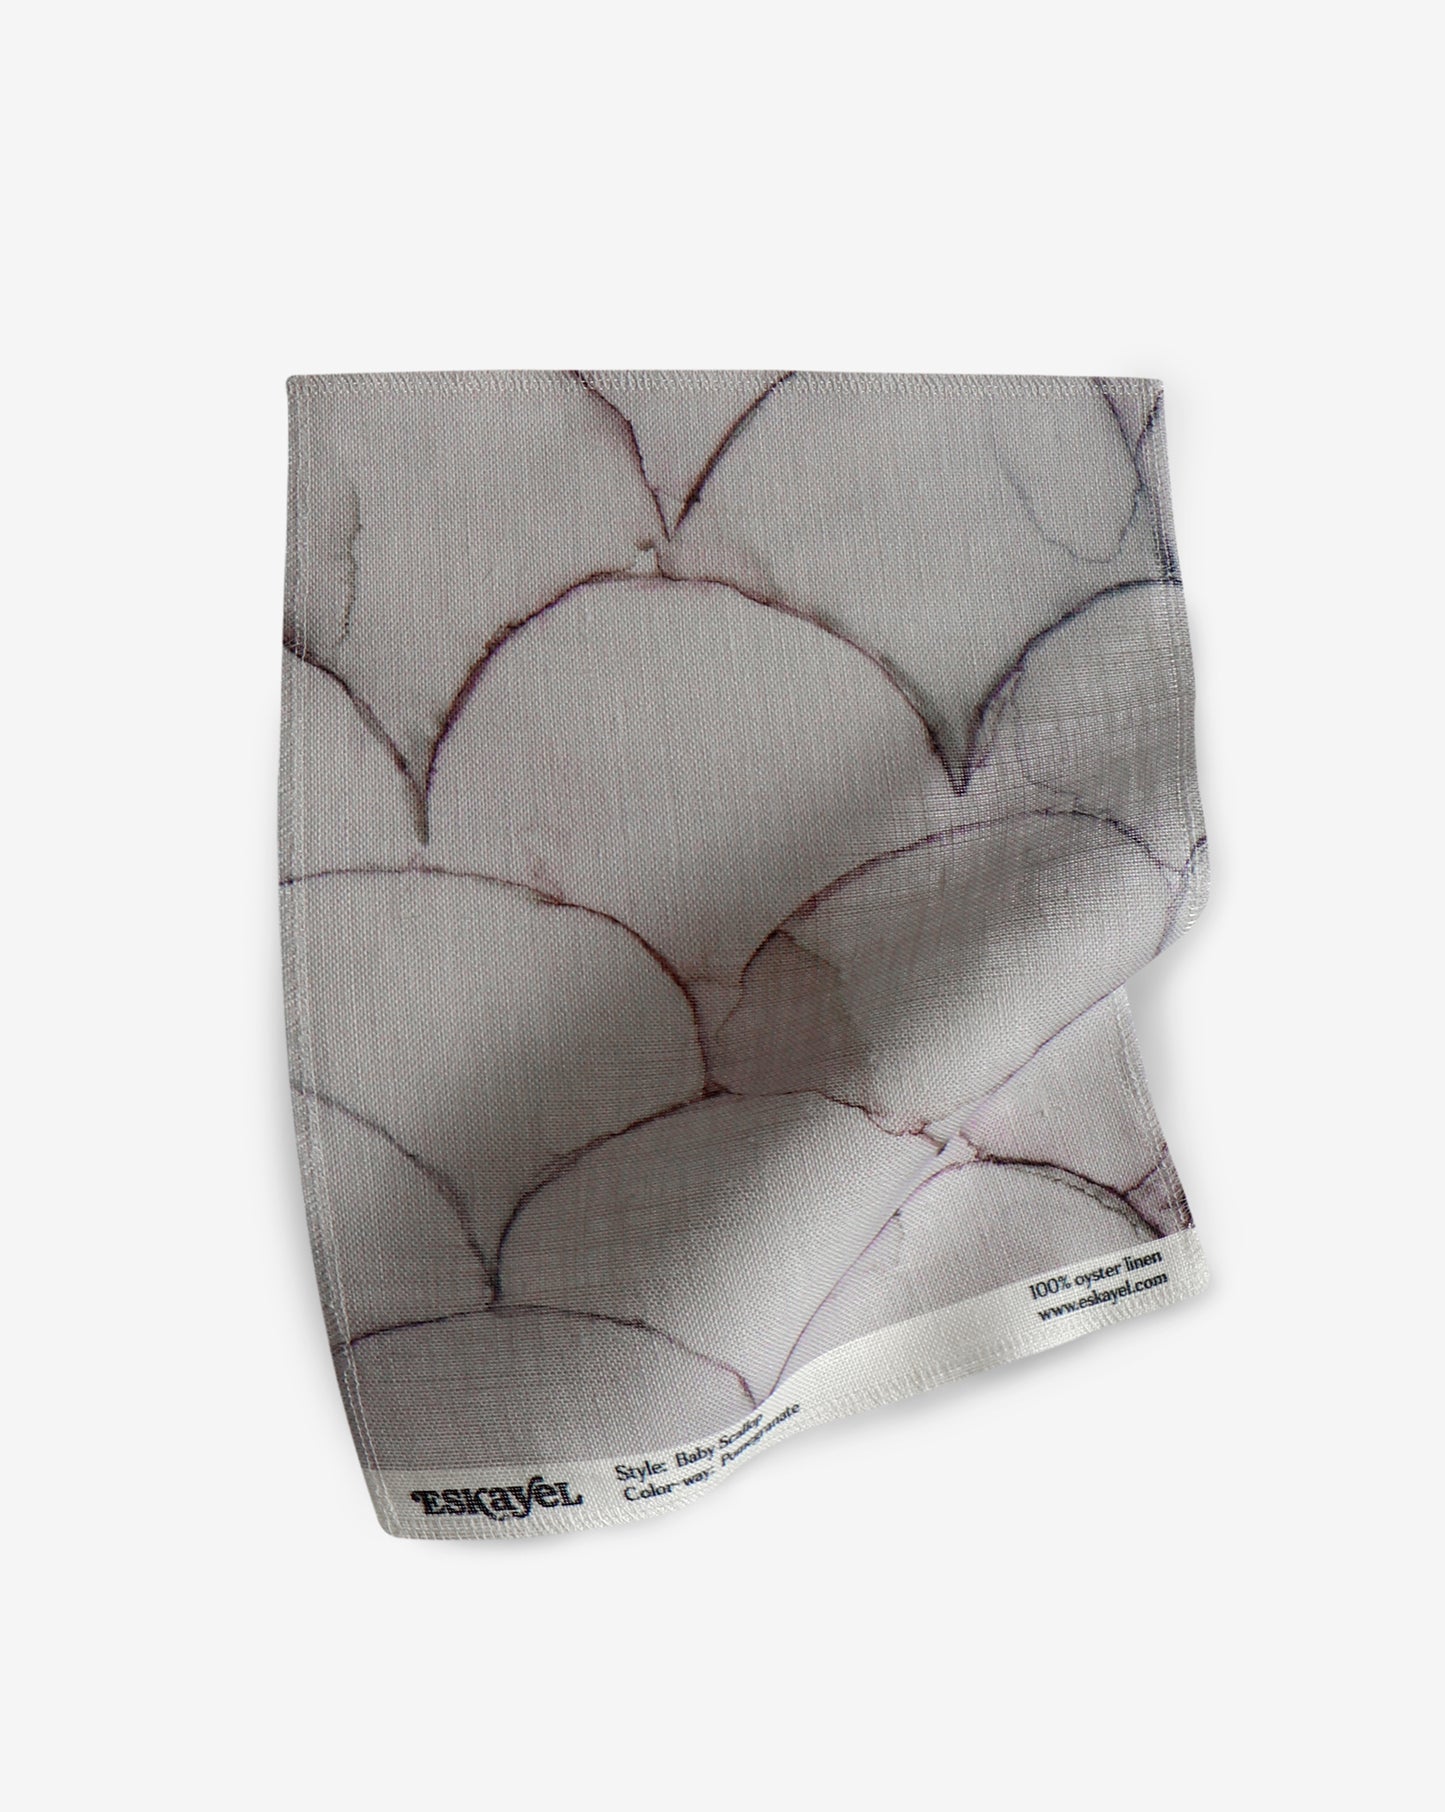 A white Baby Scallop Fabric with a pattern of geometric motifs